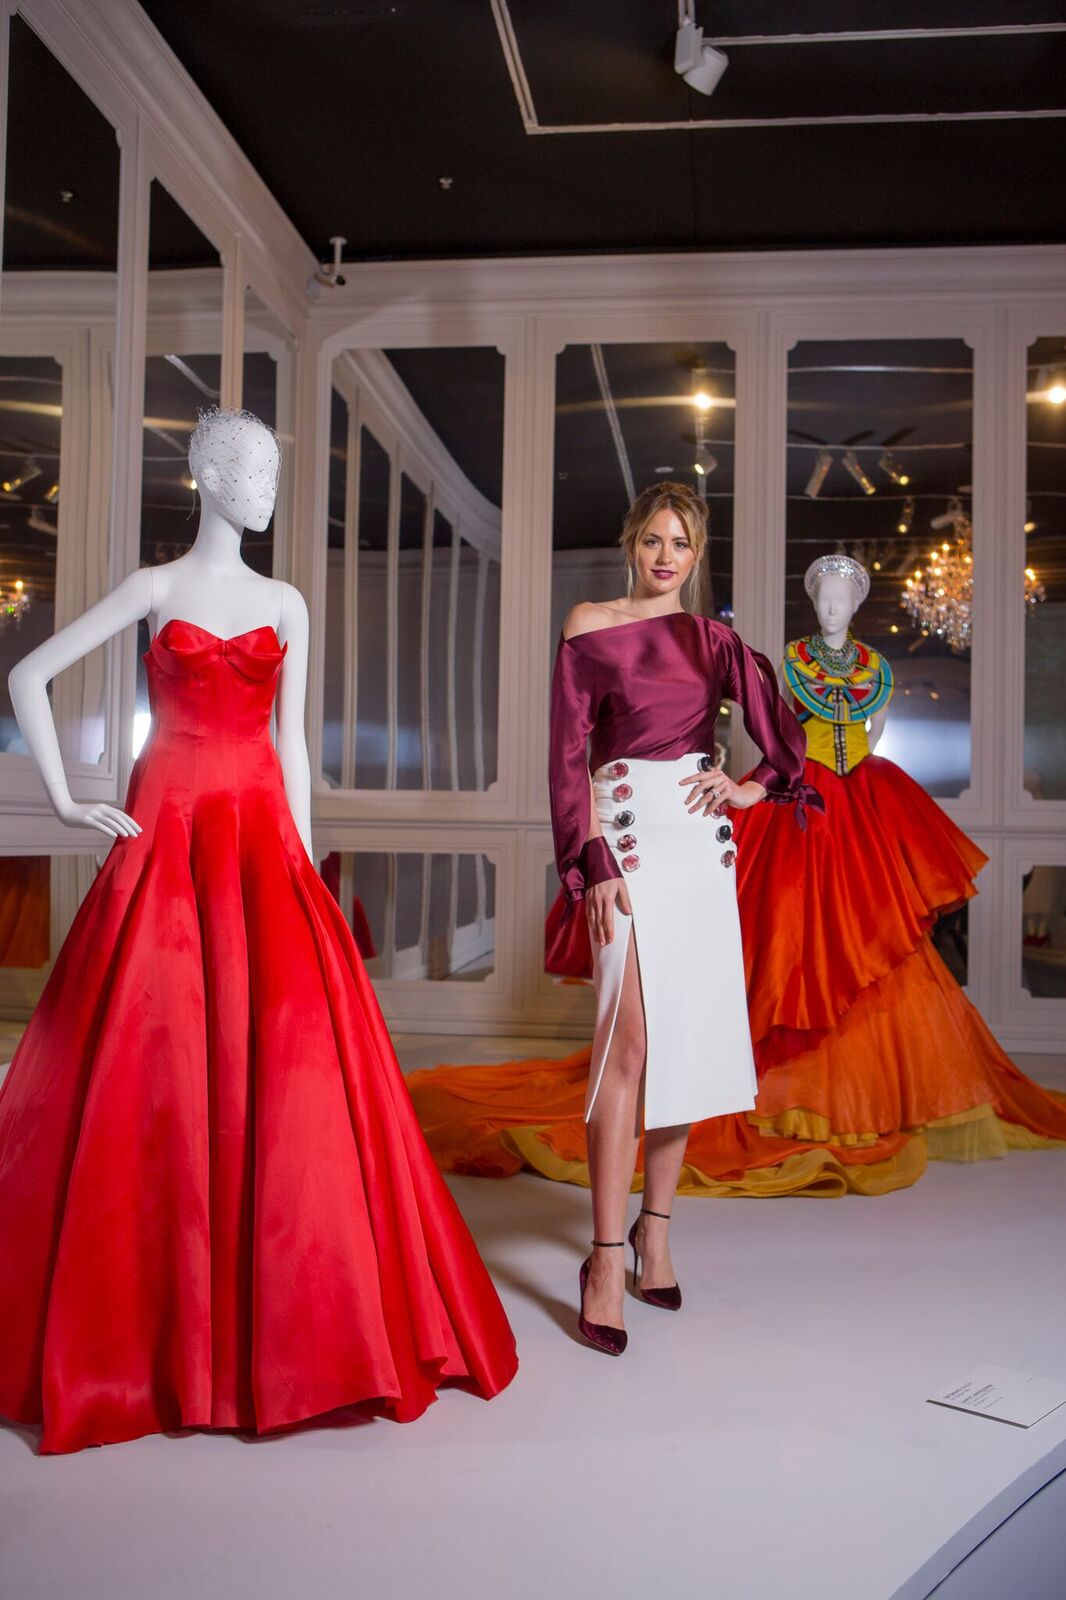 The House of Dior - 70 Years of Haute Couture